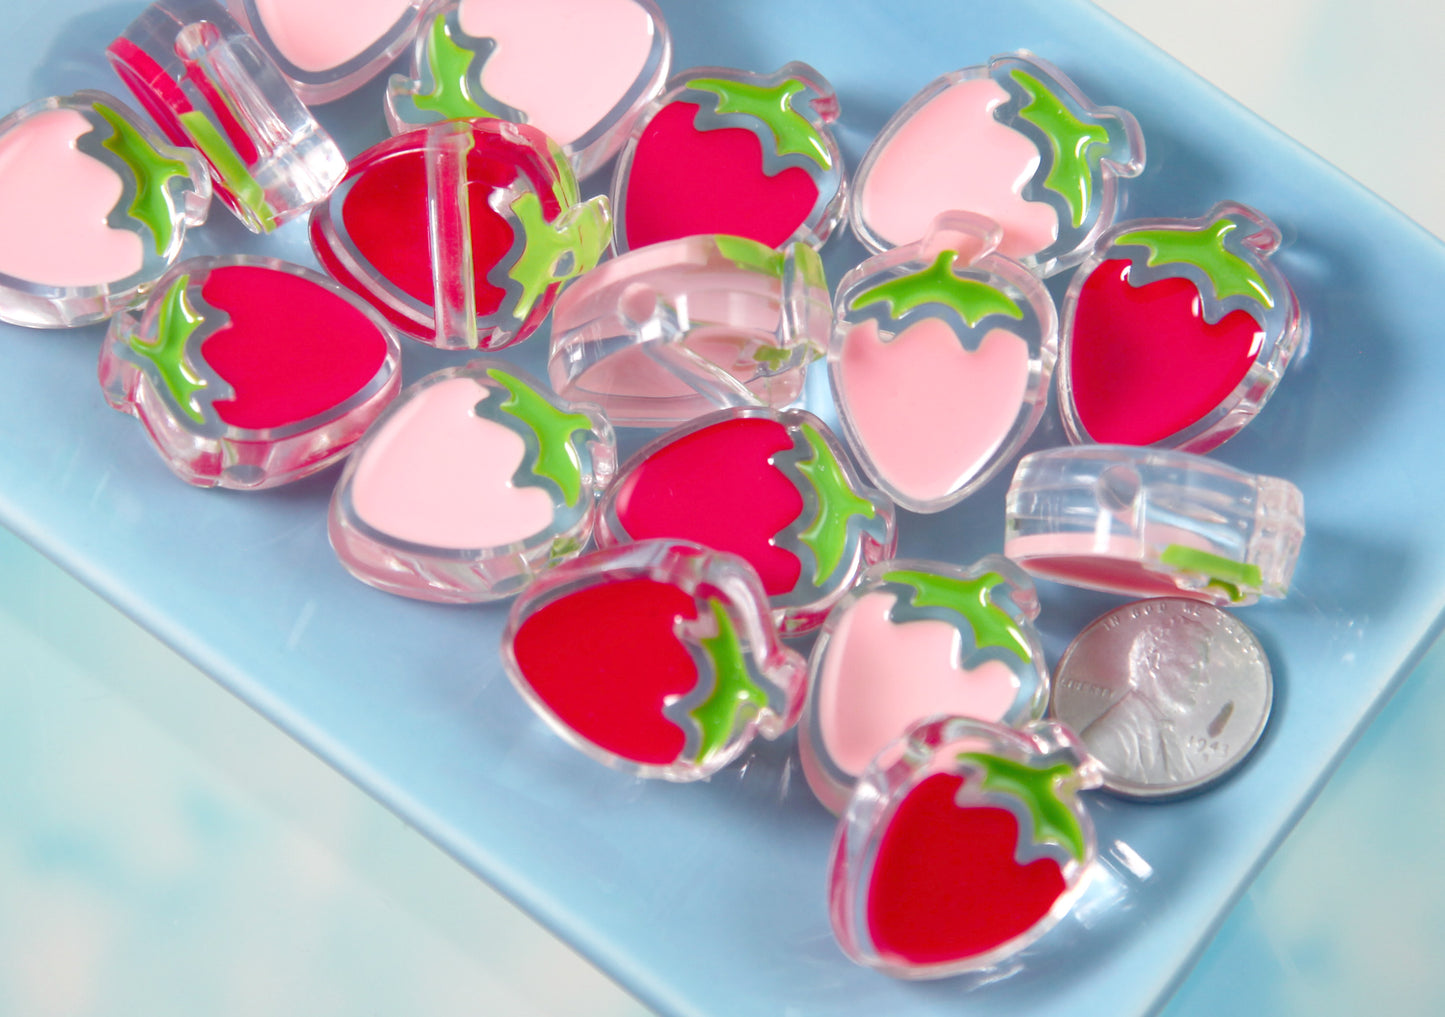 Strawberry Beads - 26mm Strawberry Transparent Acrylic or Resin Beads - 8 pc set